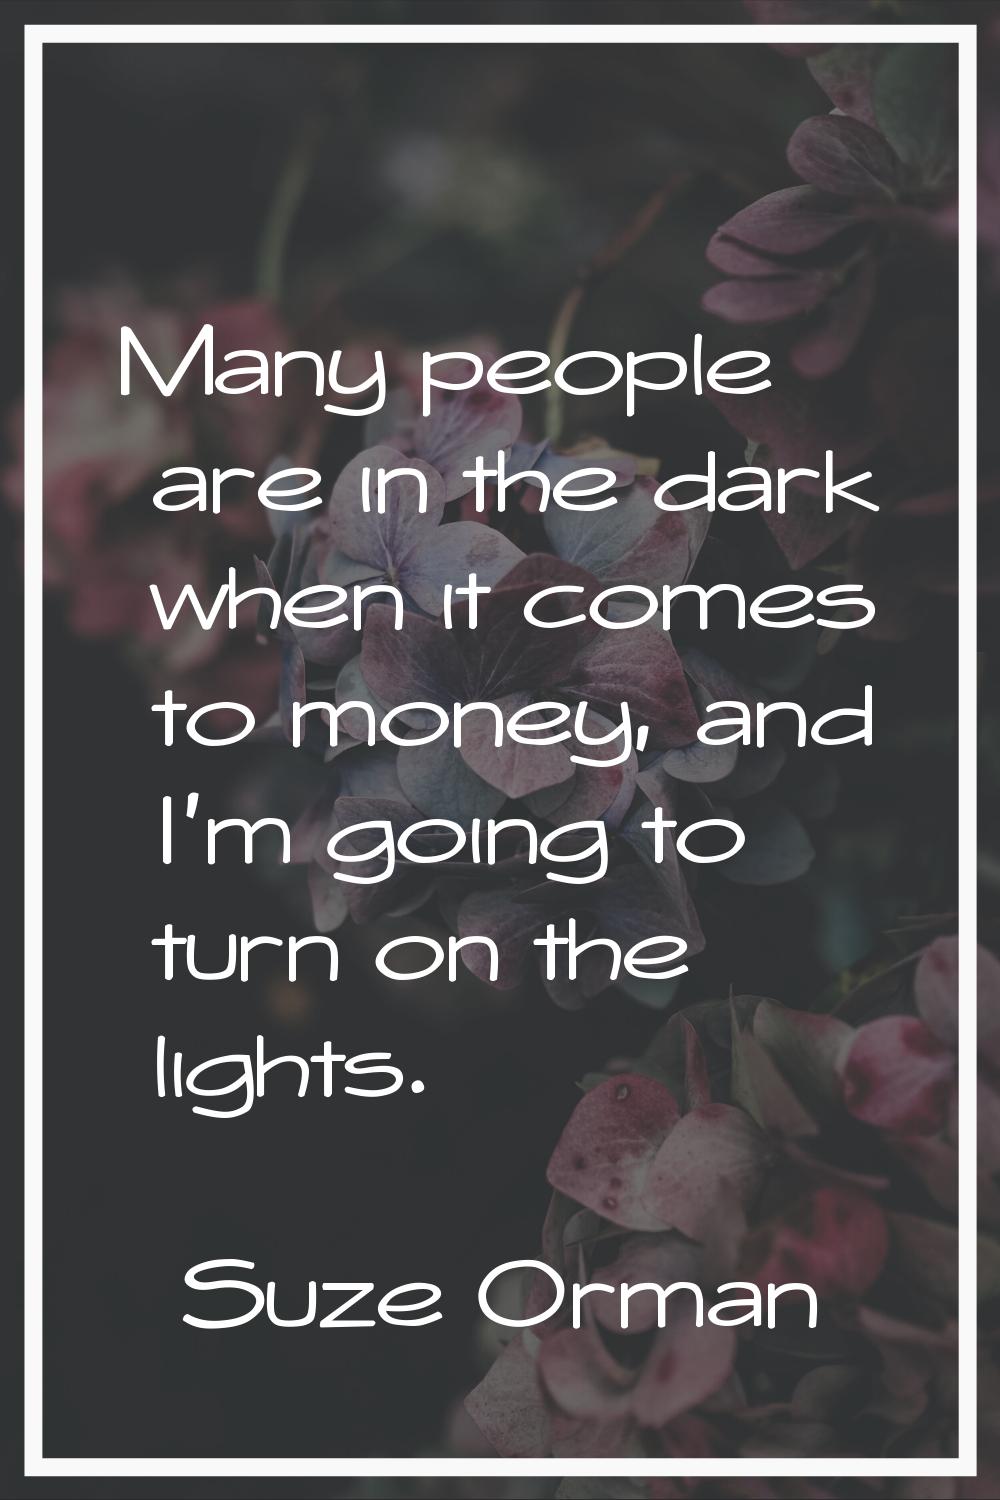 Many people are in the dark when it comes to money, and I'm going to turn on the lights.